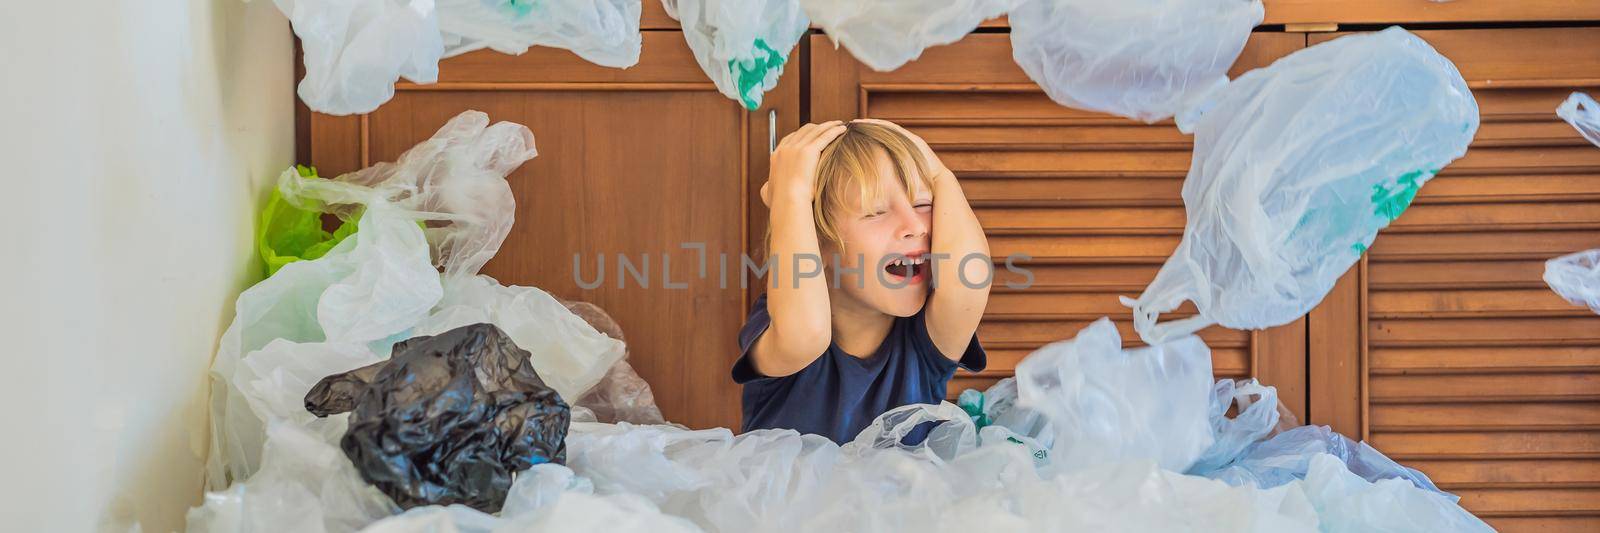 The boy's parents used too many plastic bags that they filled up the entire kitchen. Zero waste concept. The concept of World Environment Day. BANNER, LONG FORMAT